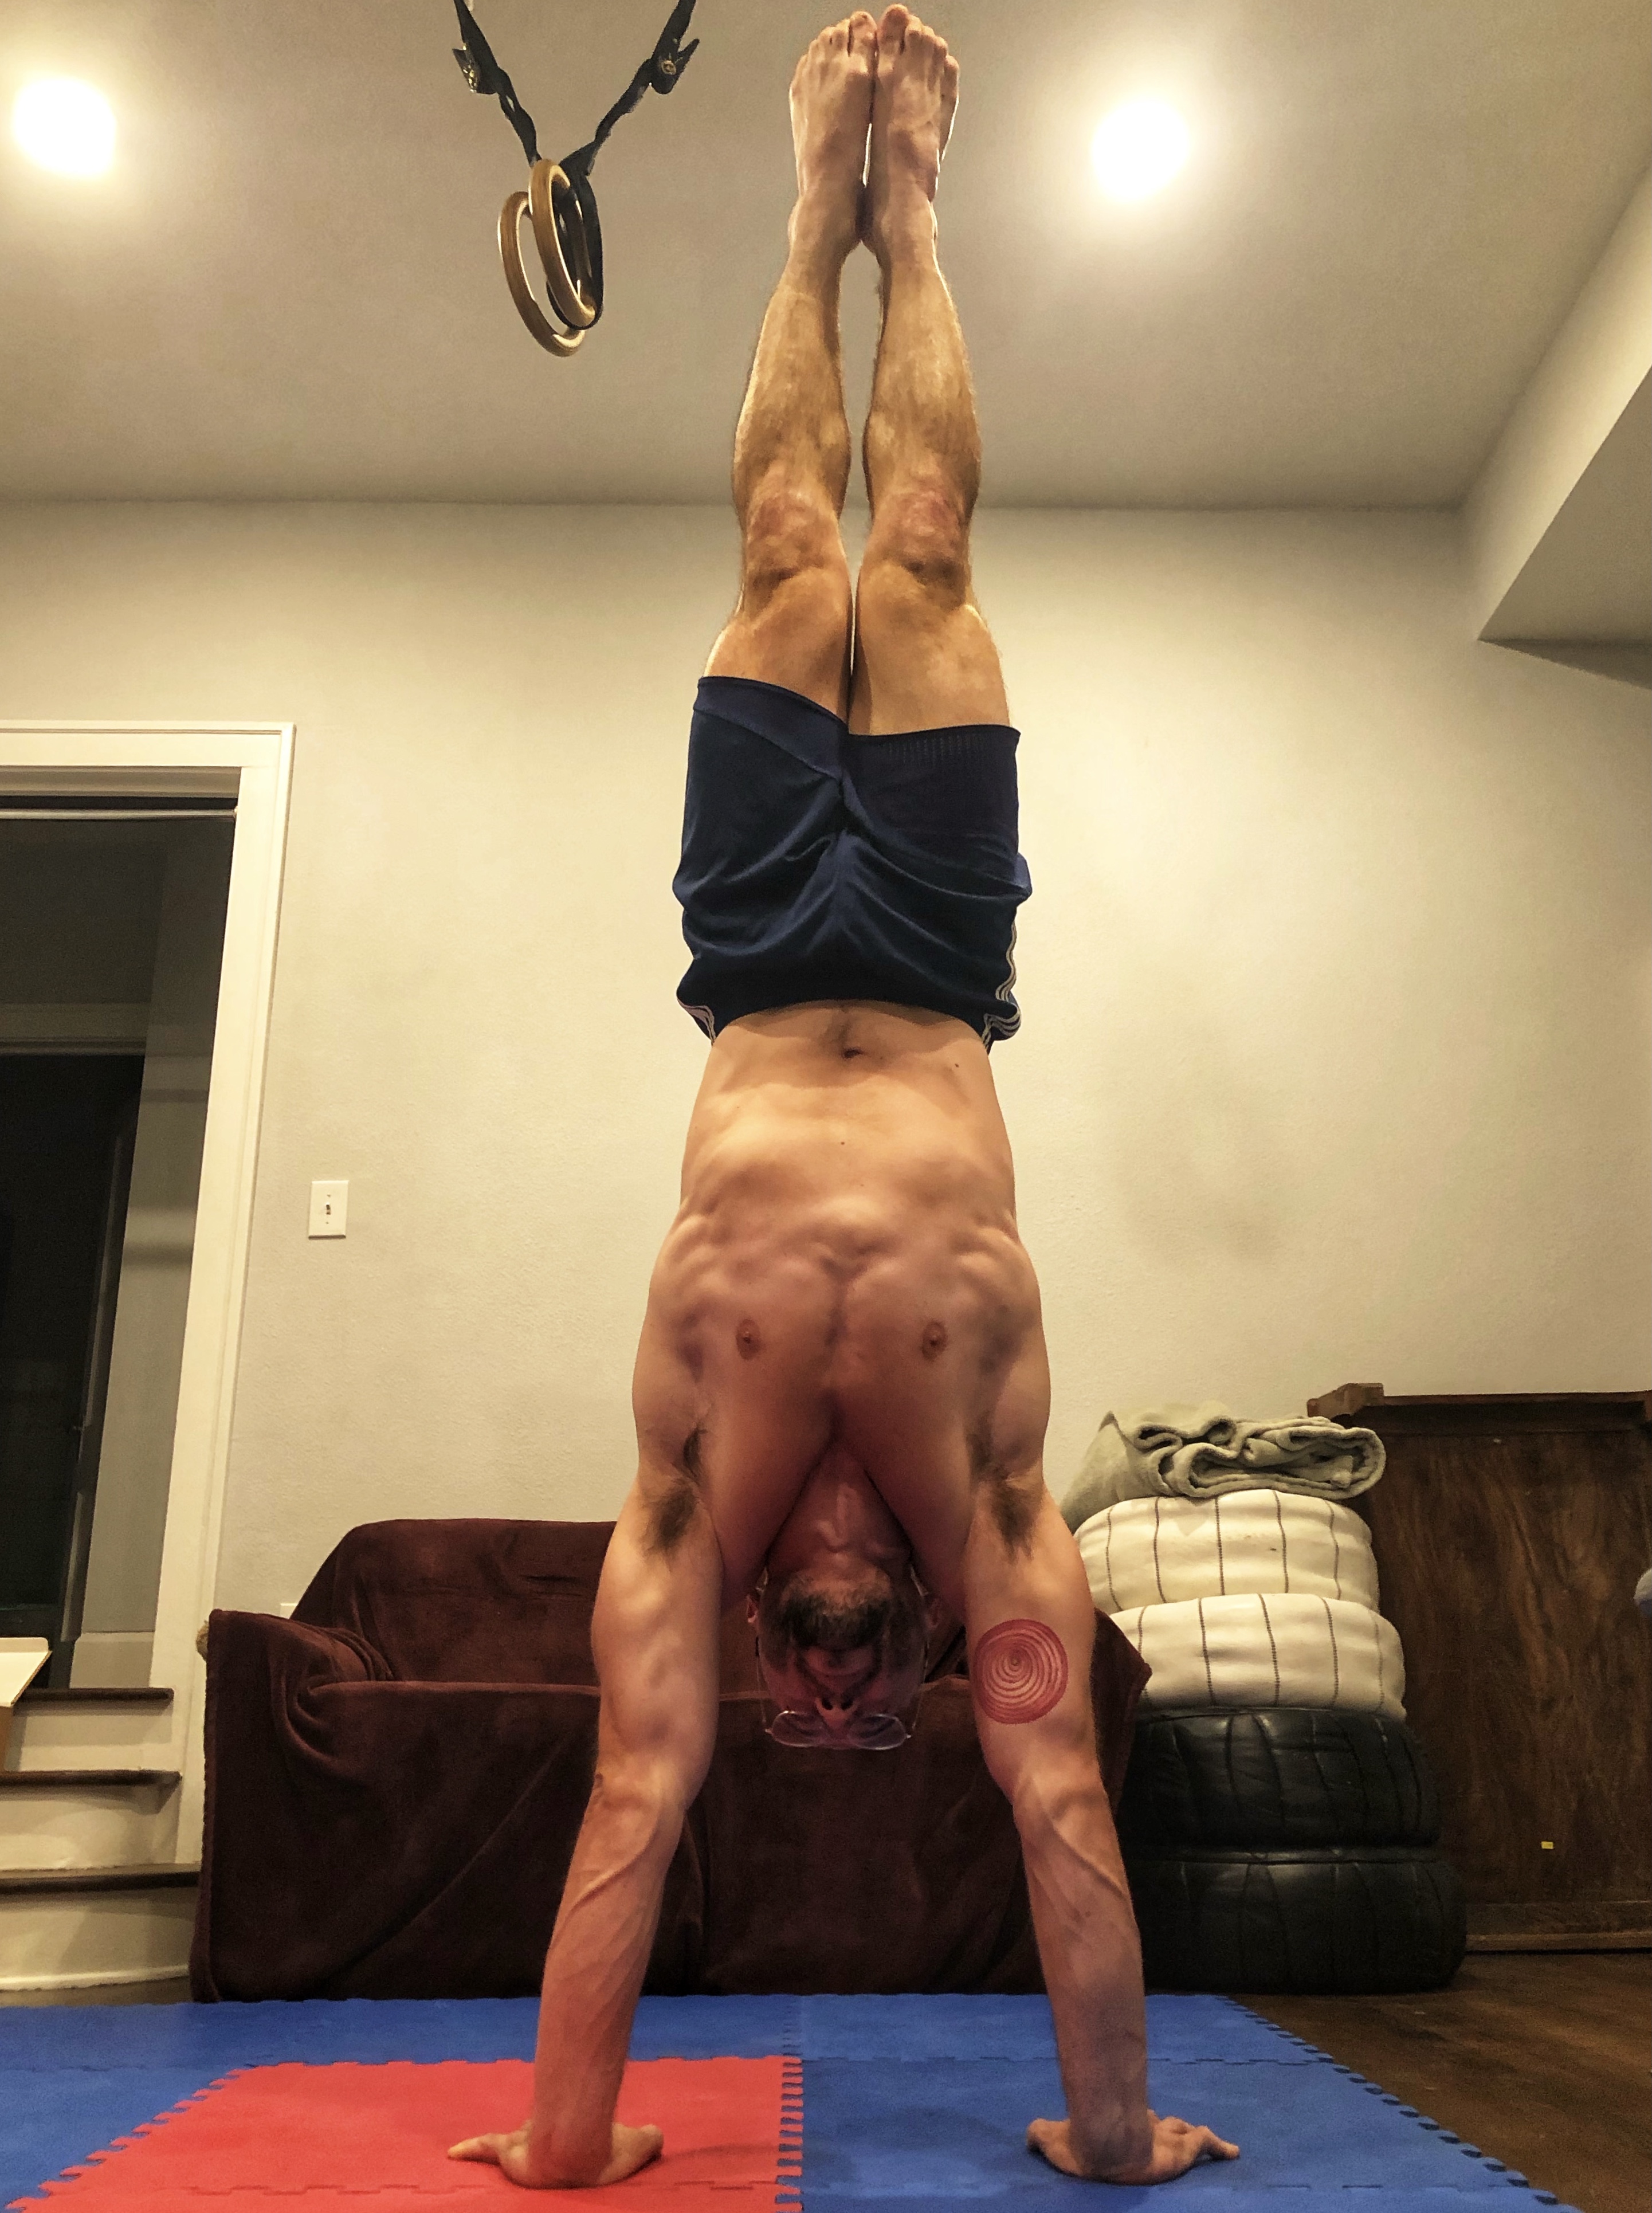 Perfect handstand